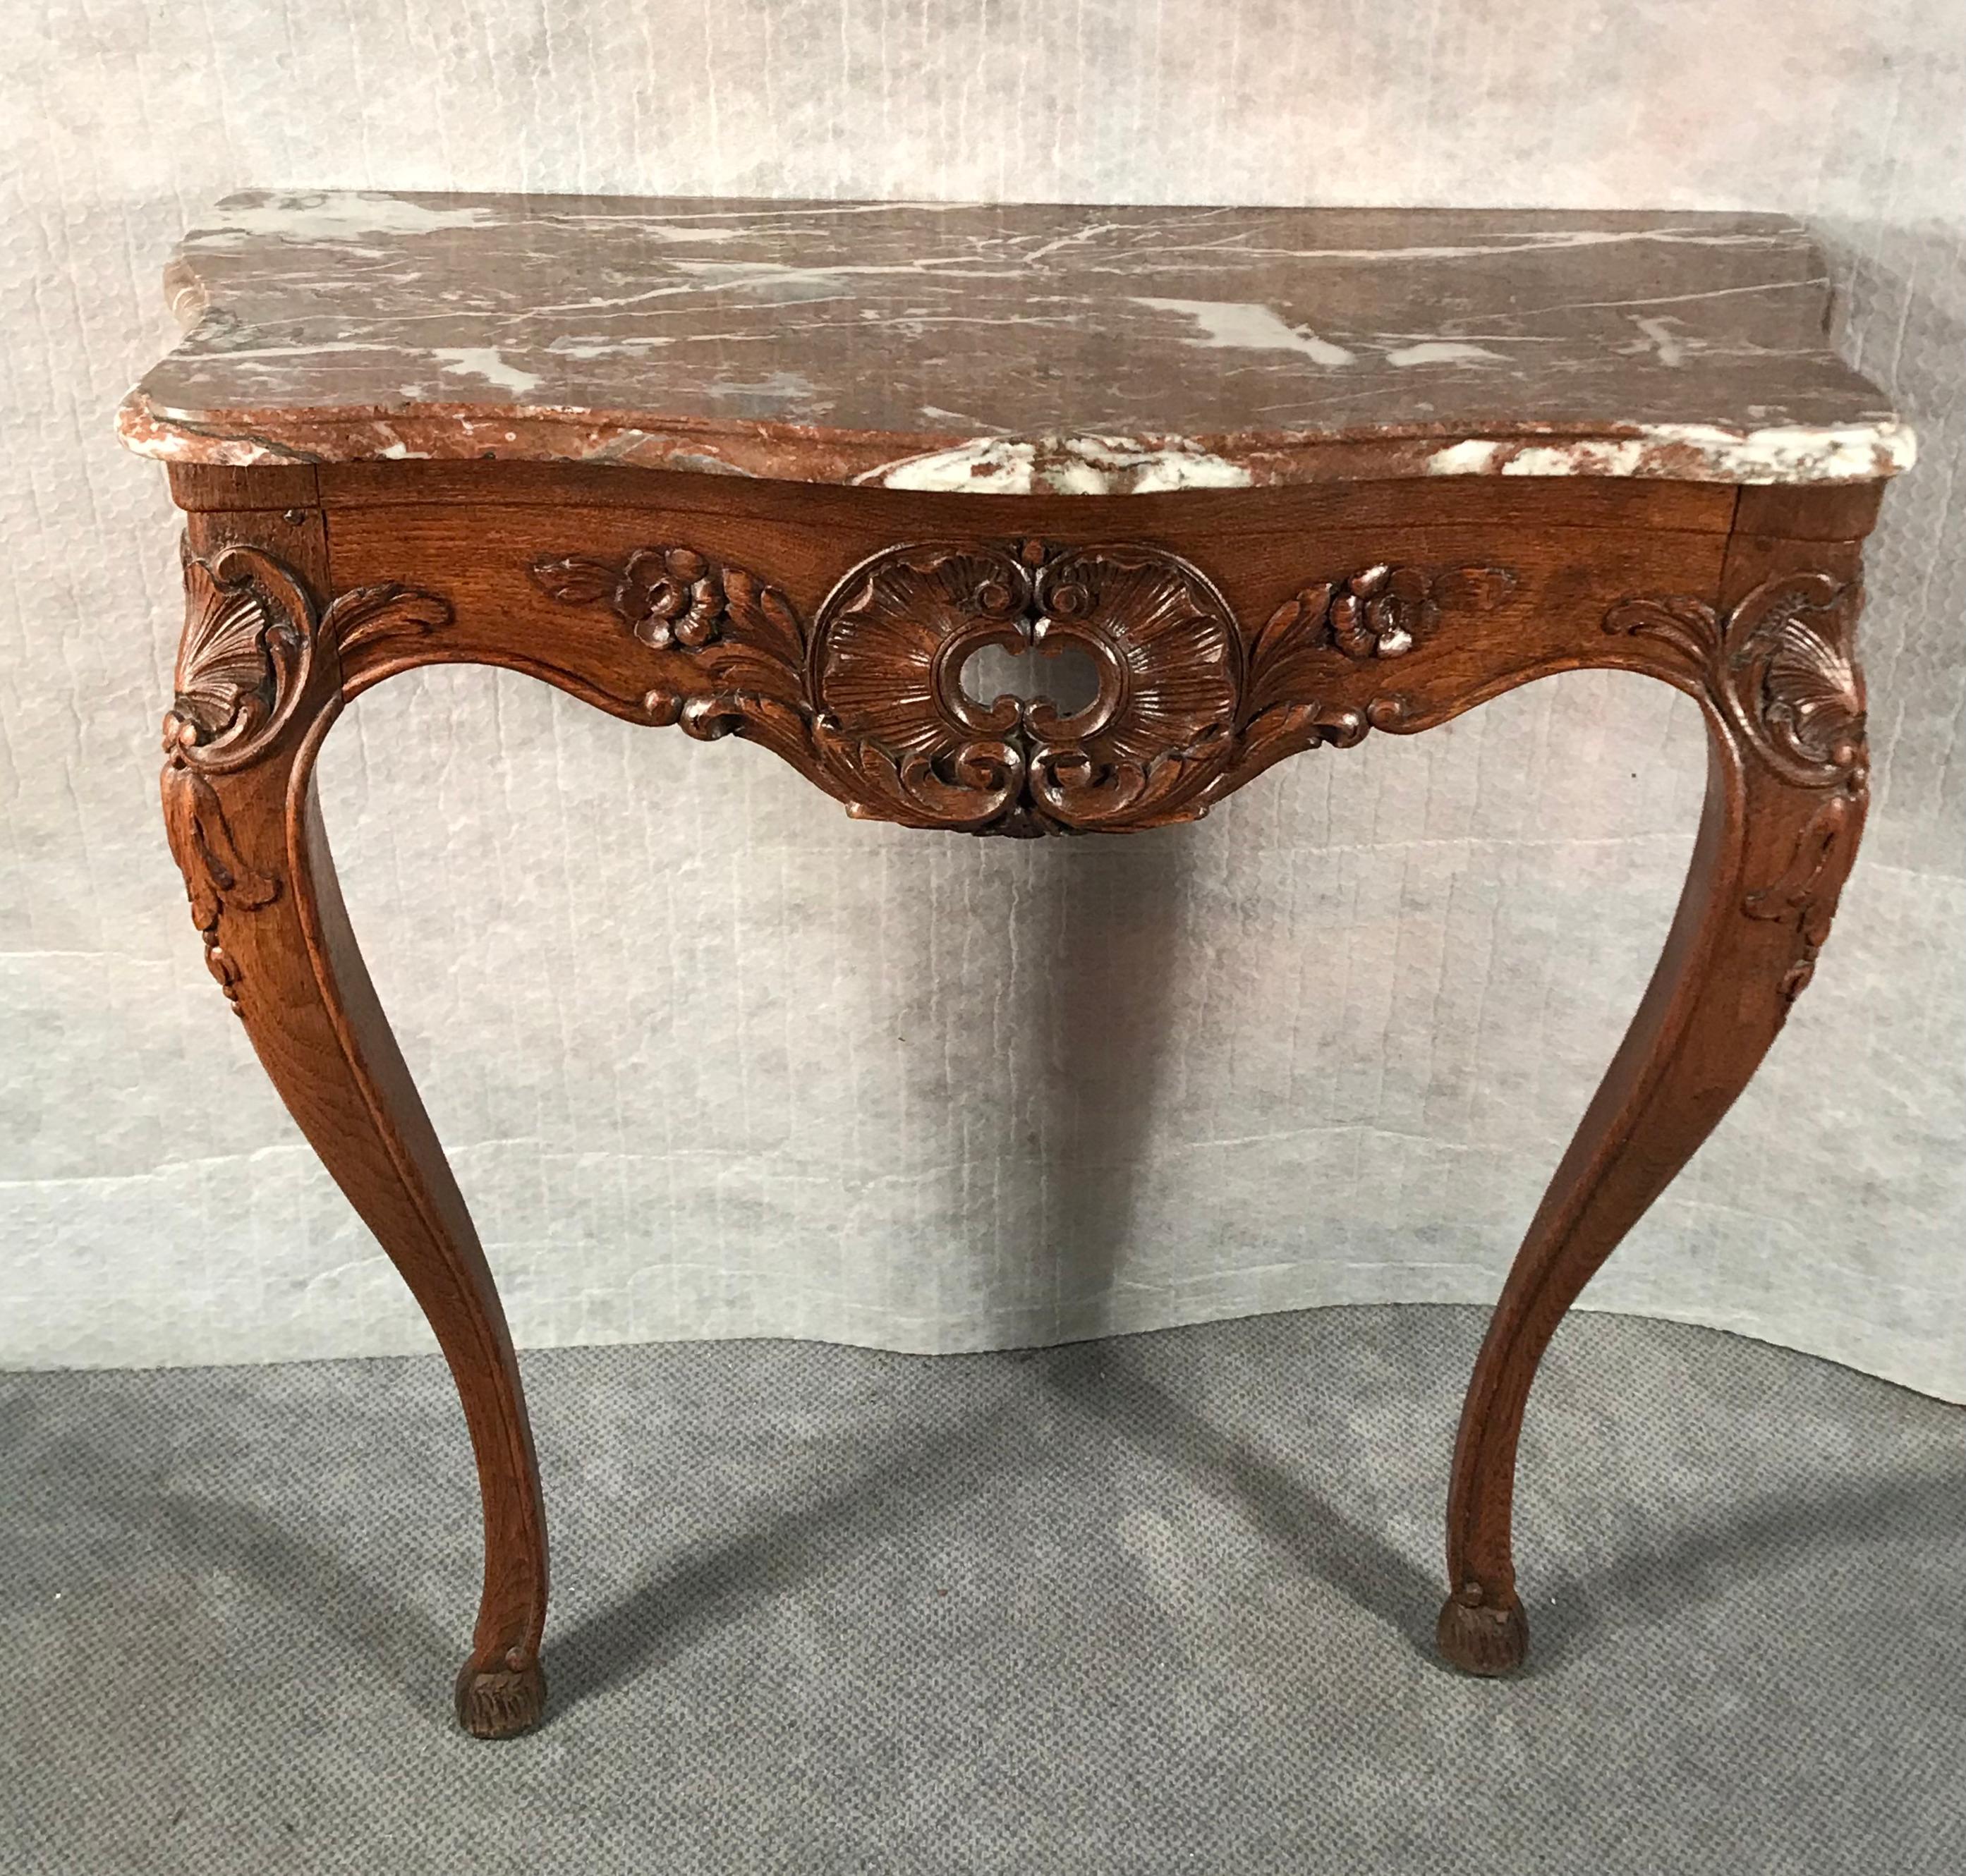 Baroque console table, Germany 1750.
The console table stands out for its finely carved oak wood floral decoration. The marble top is original. 
The console table is in very good condition.
      